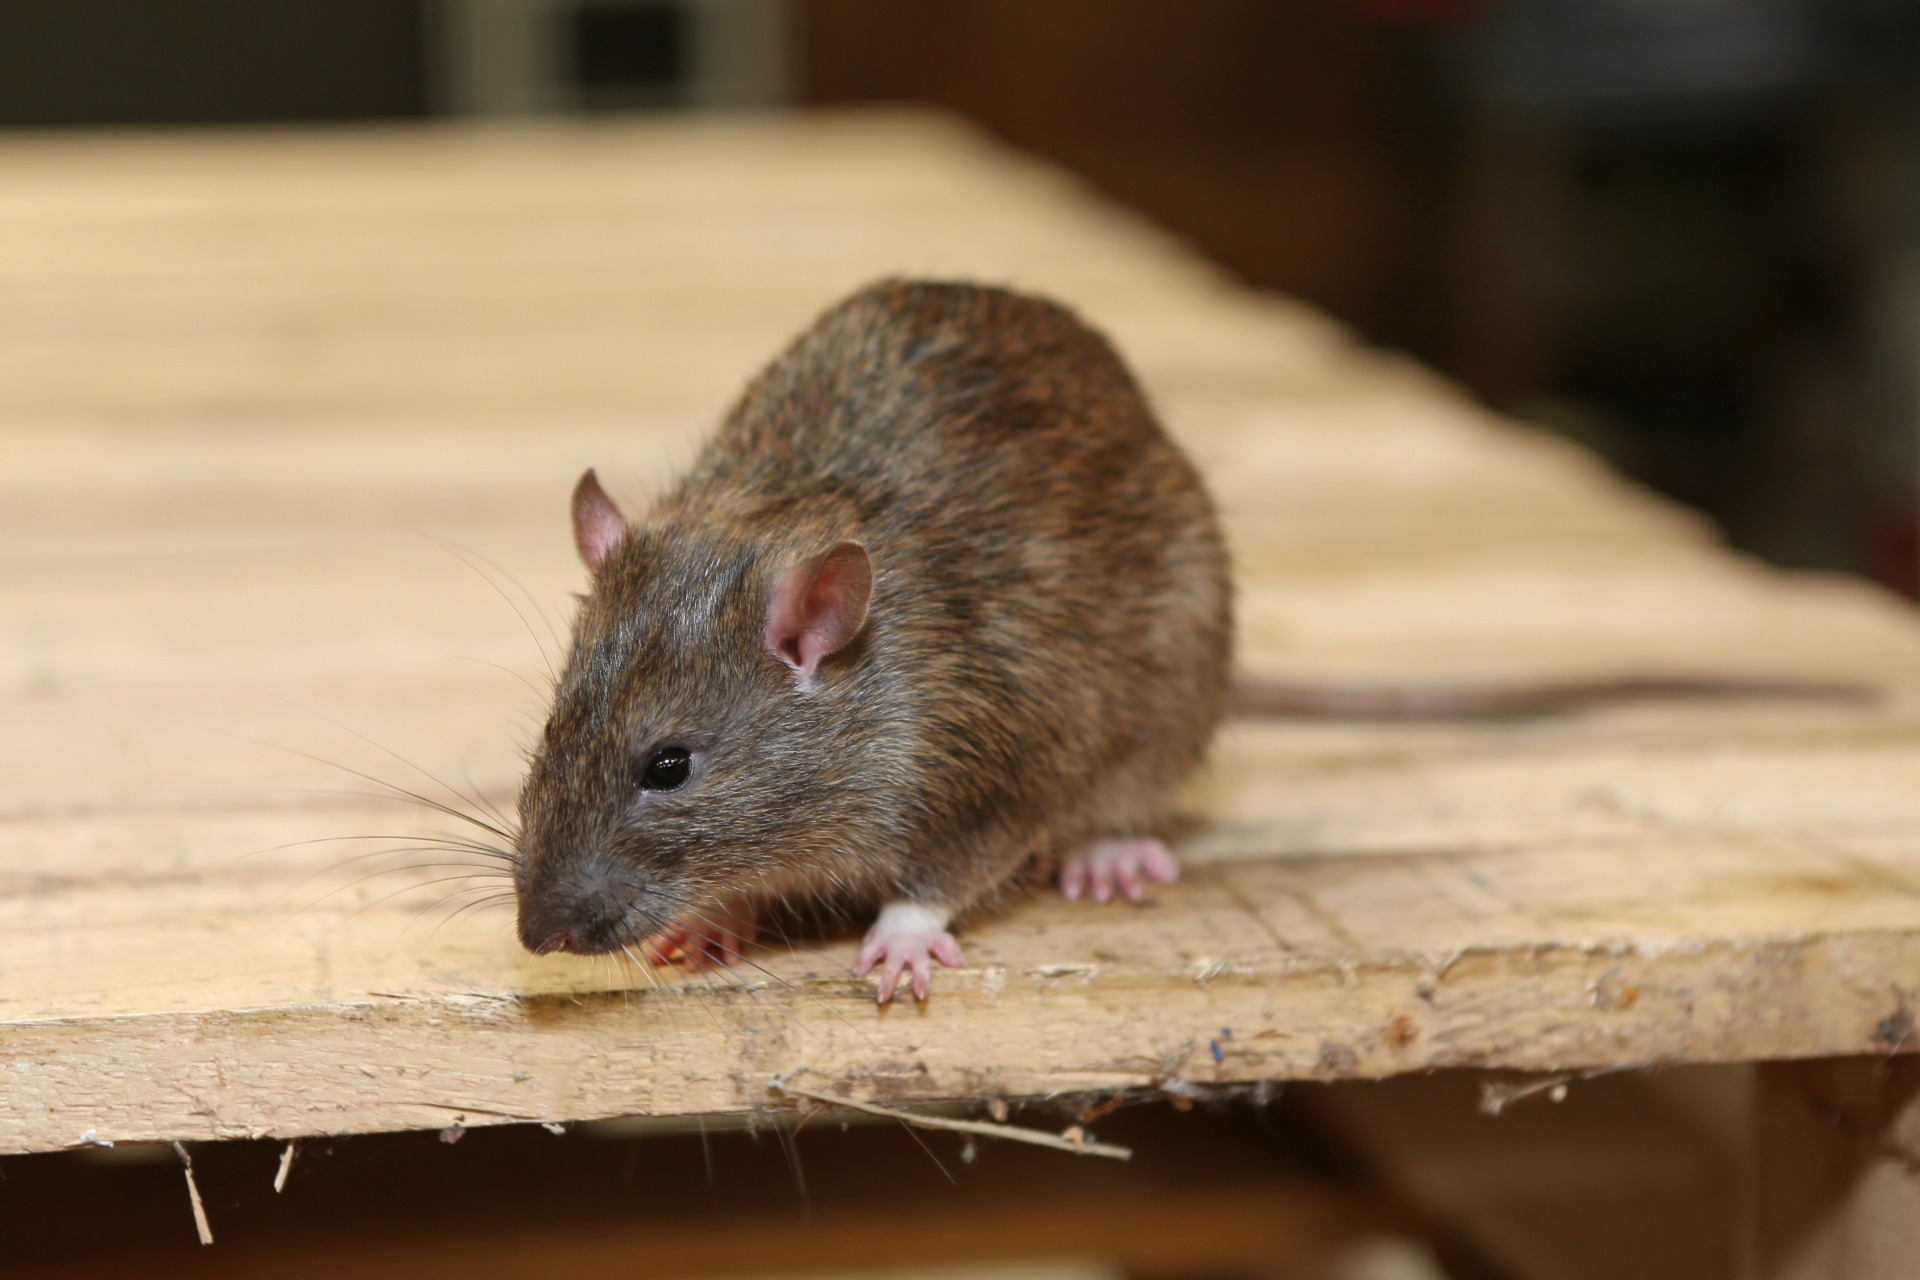 Rat extermination, Pest Control in Penge, Anerley, SE20. Call Now 020 8166 9746